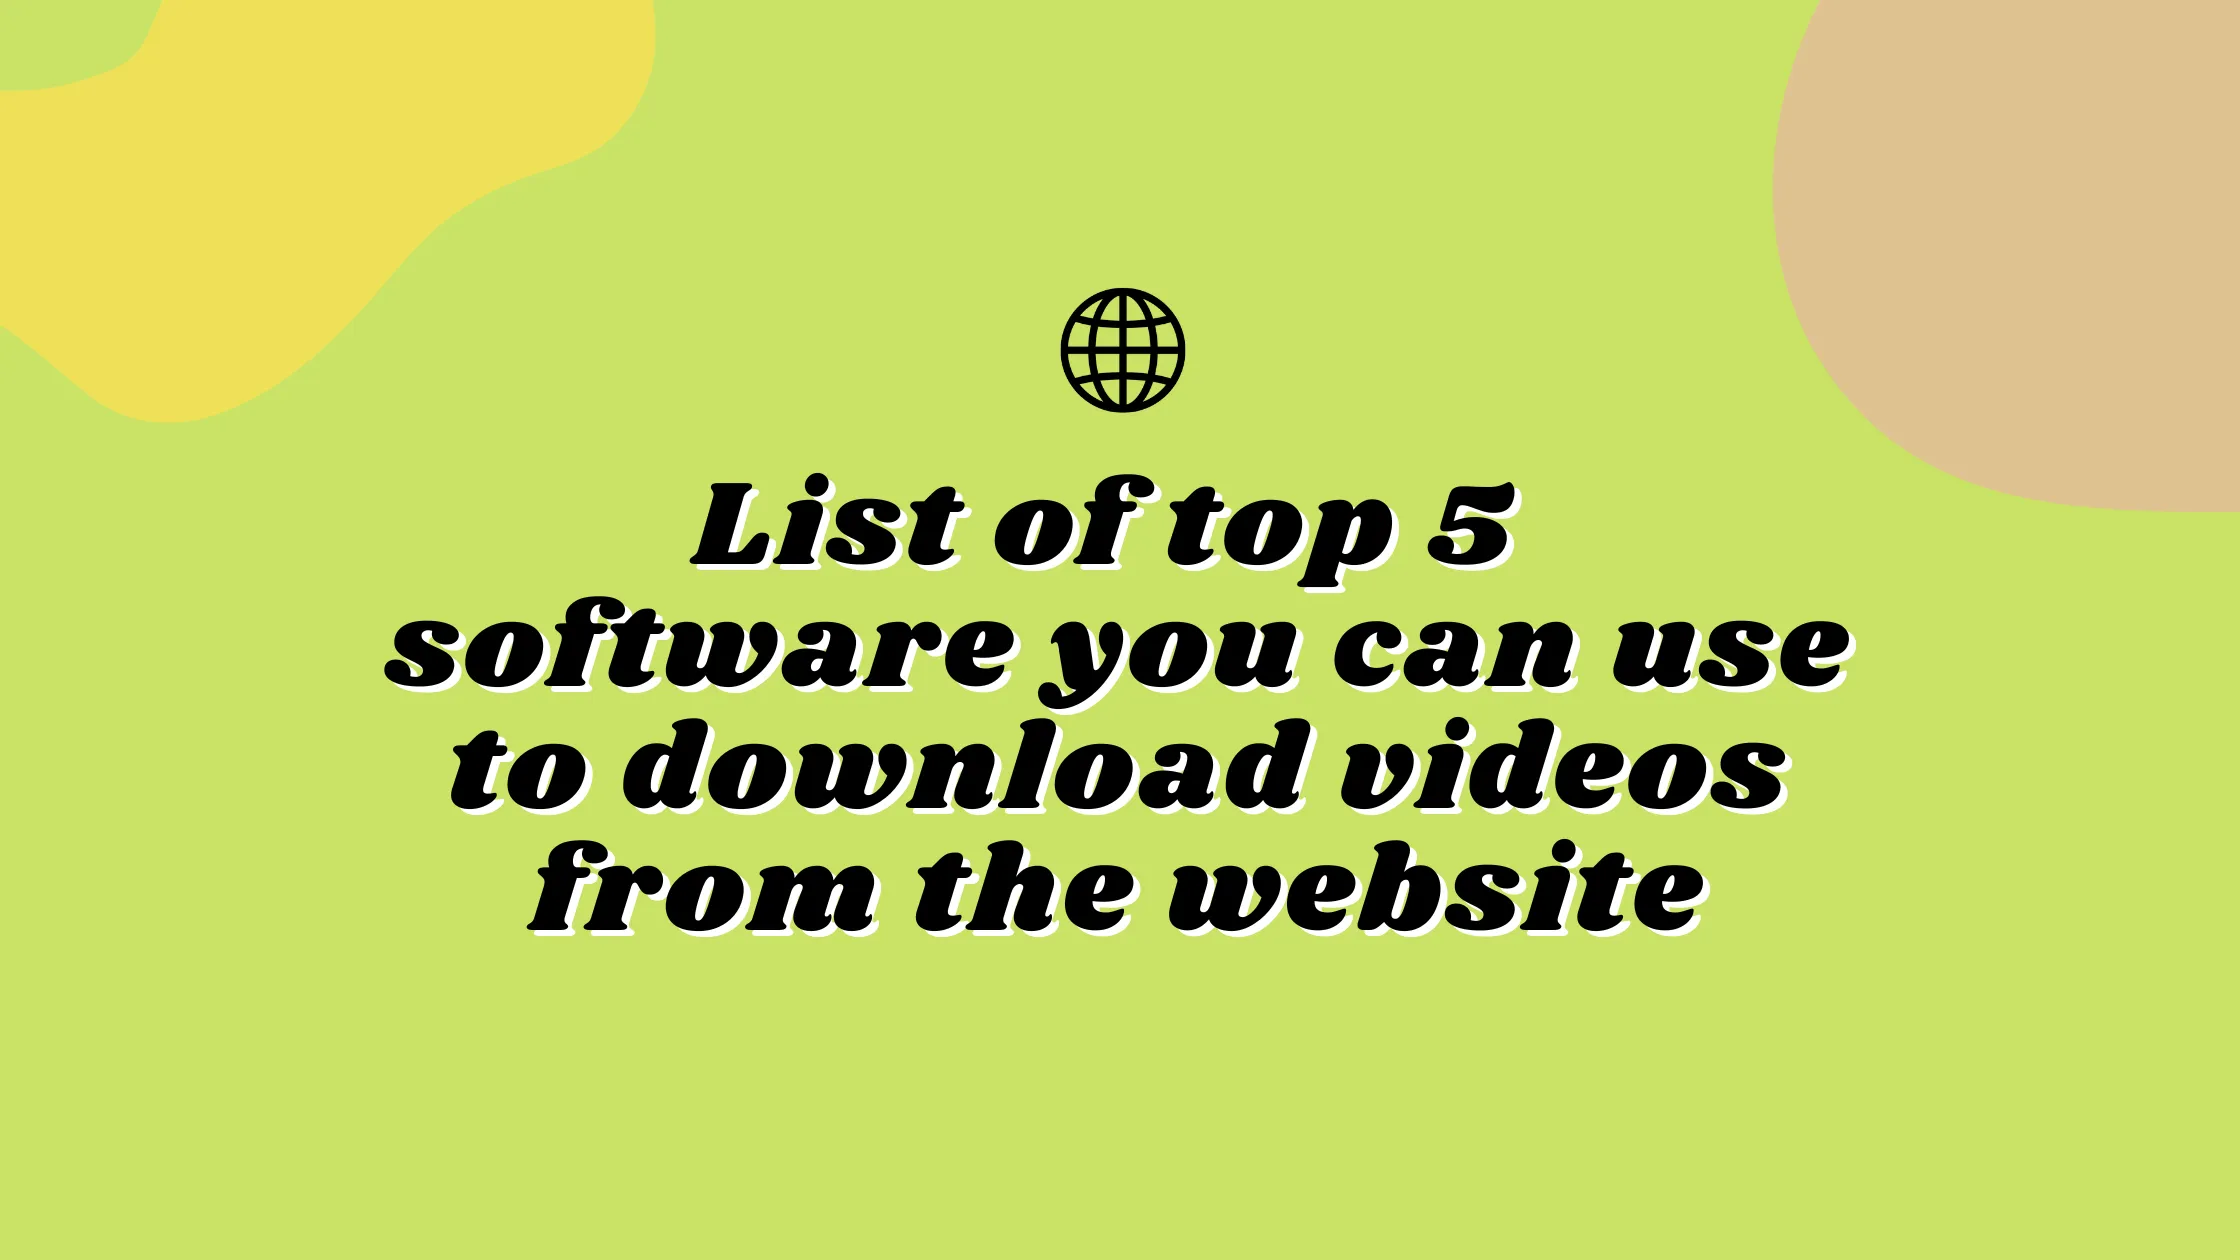 List of top 5 software you can use to download videos from the website